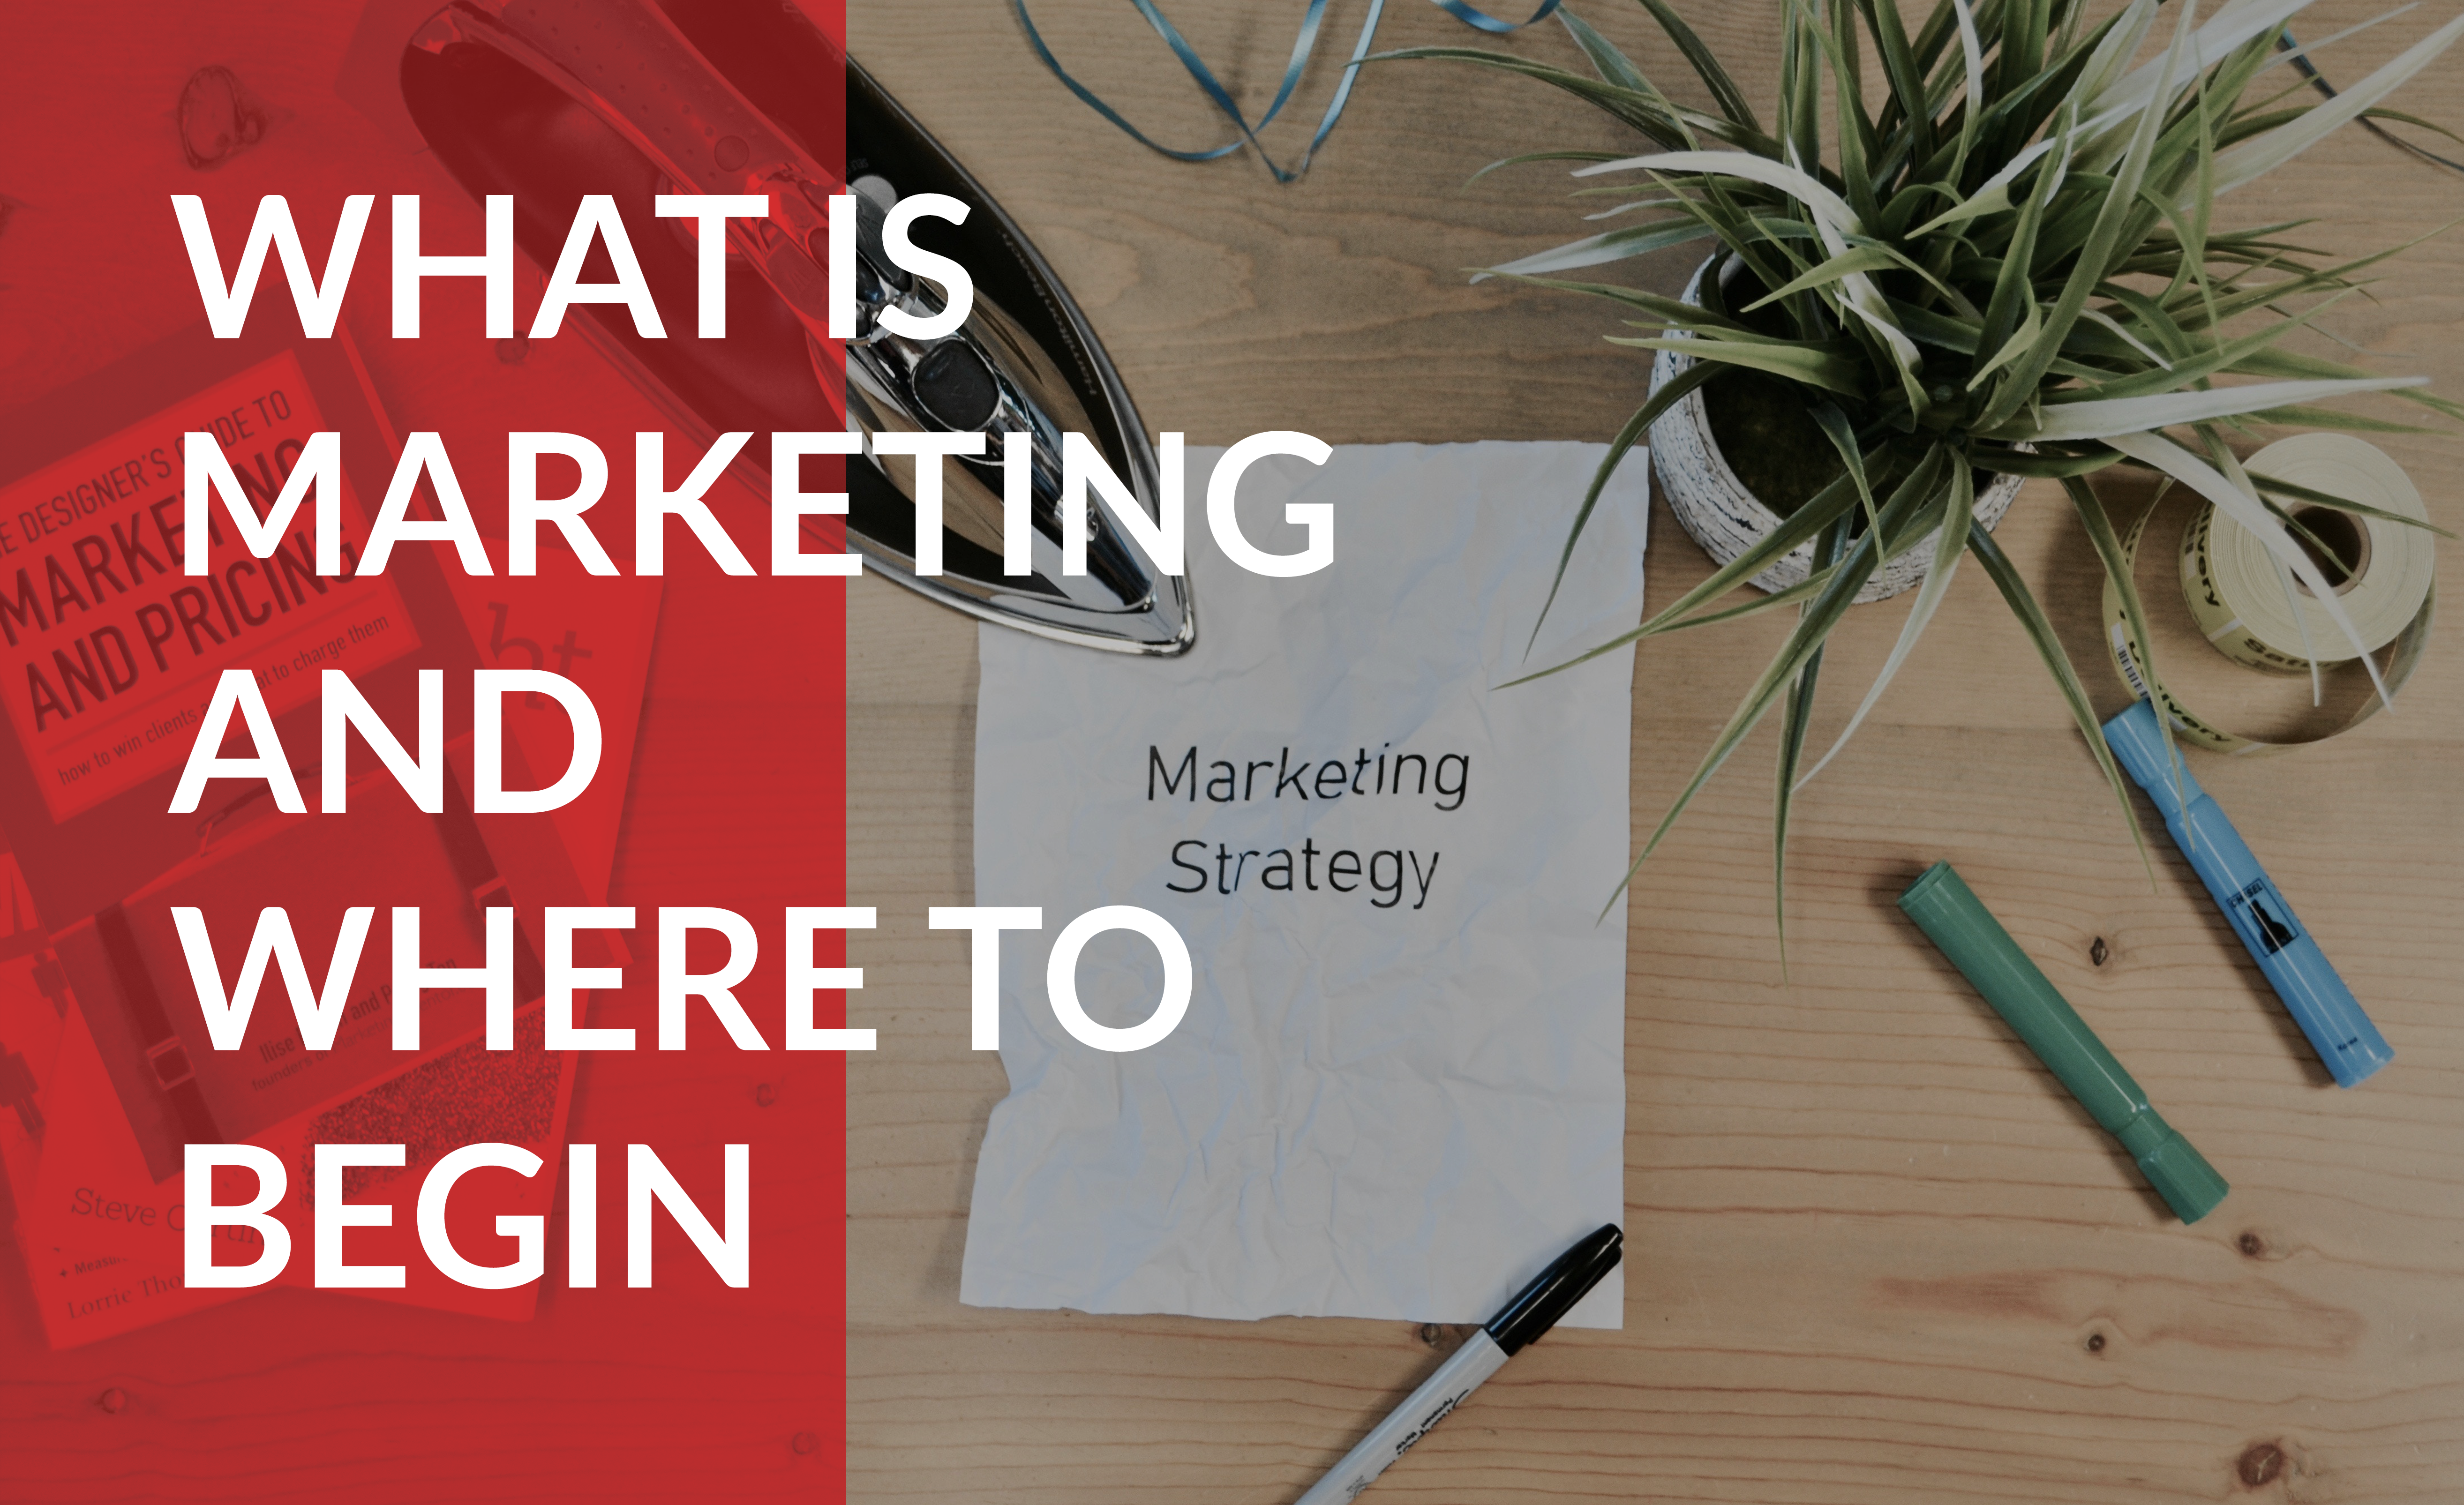 What is marketing and where to begin